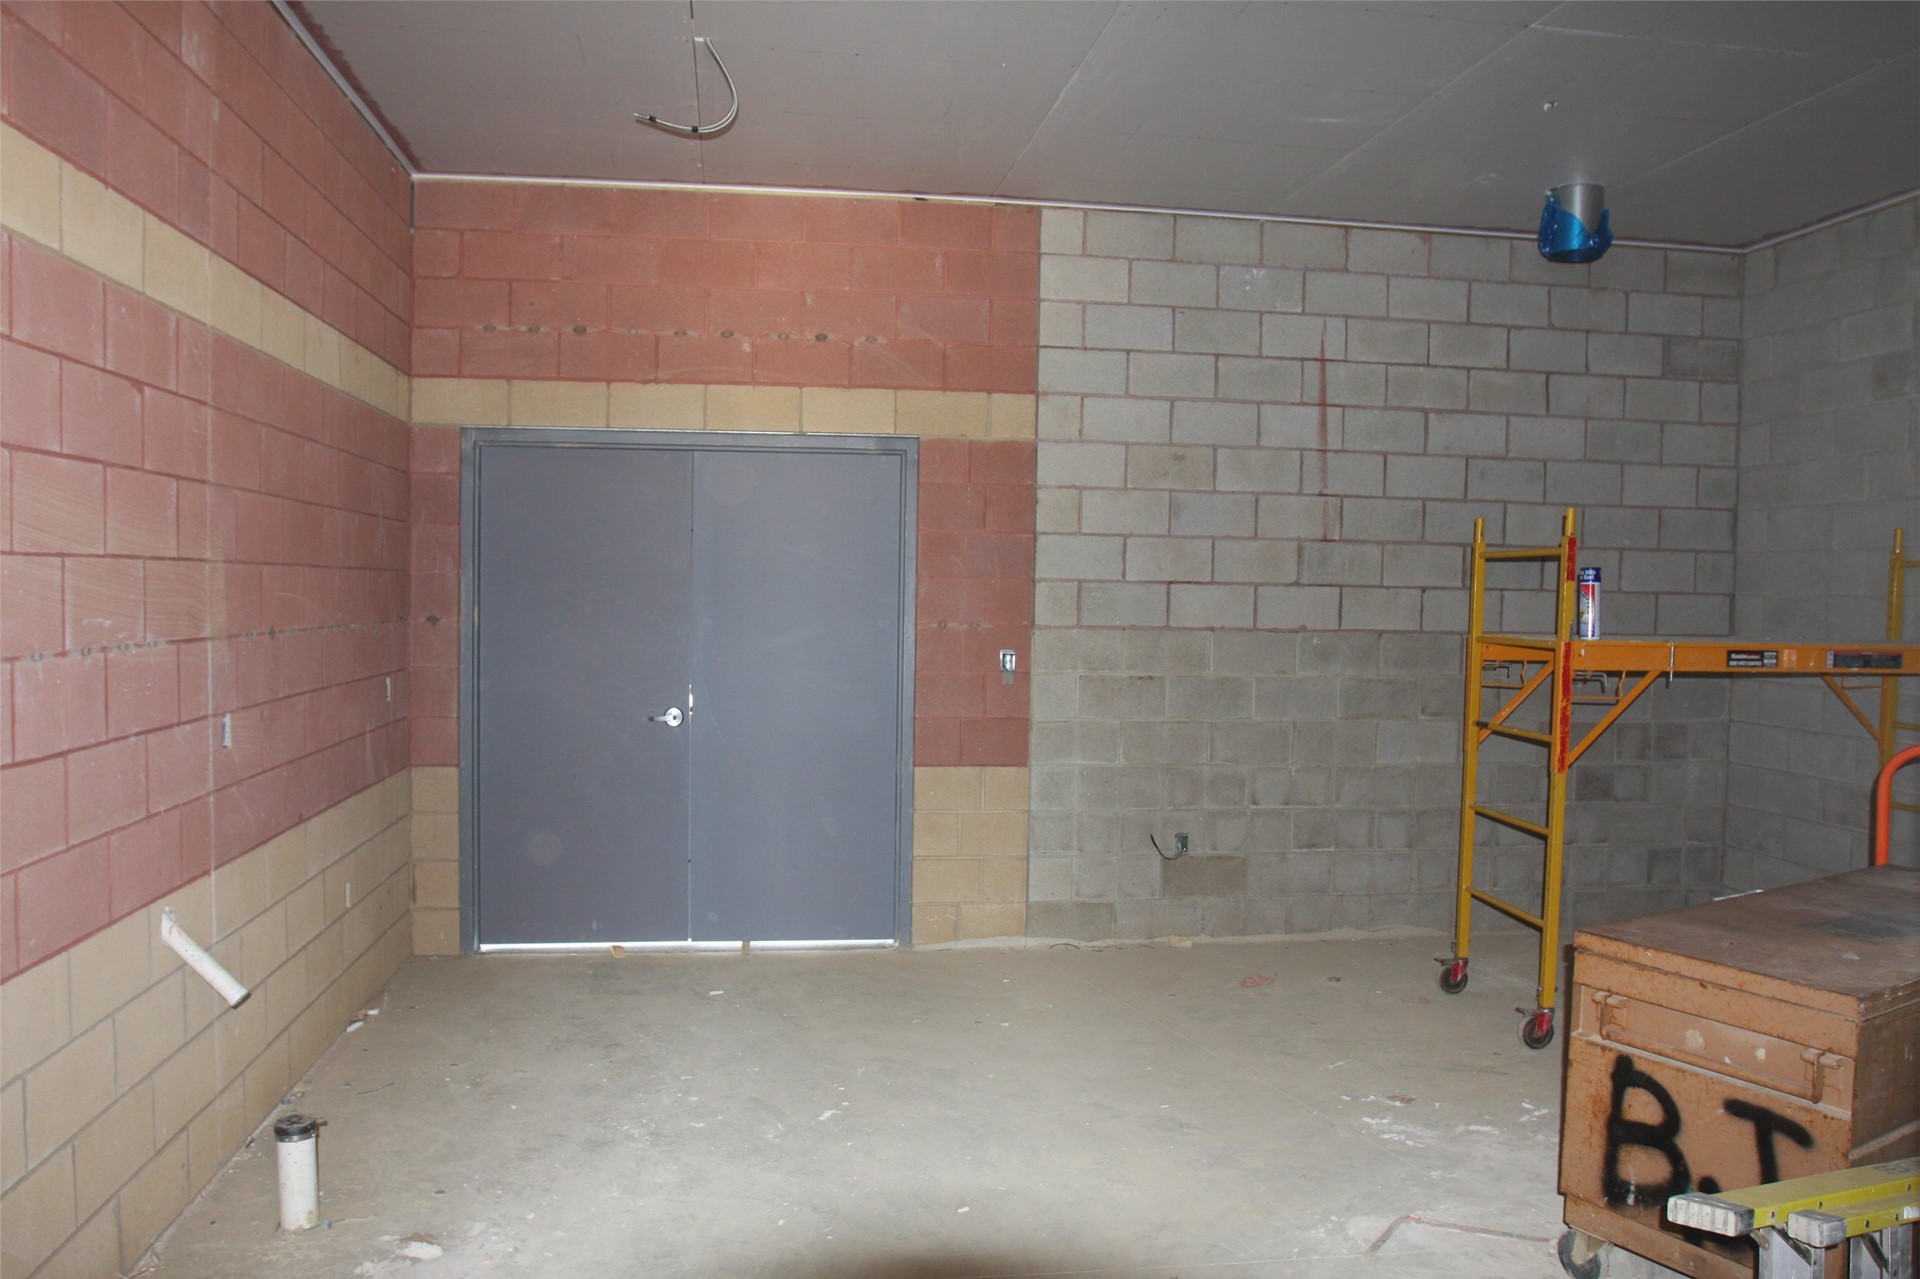 The storage area for the concession stand